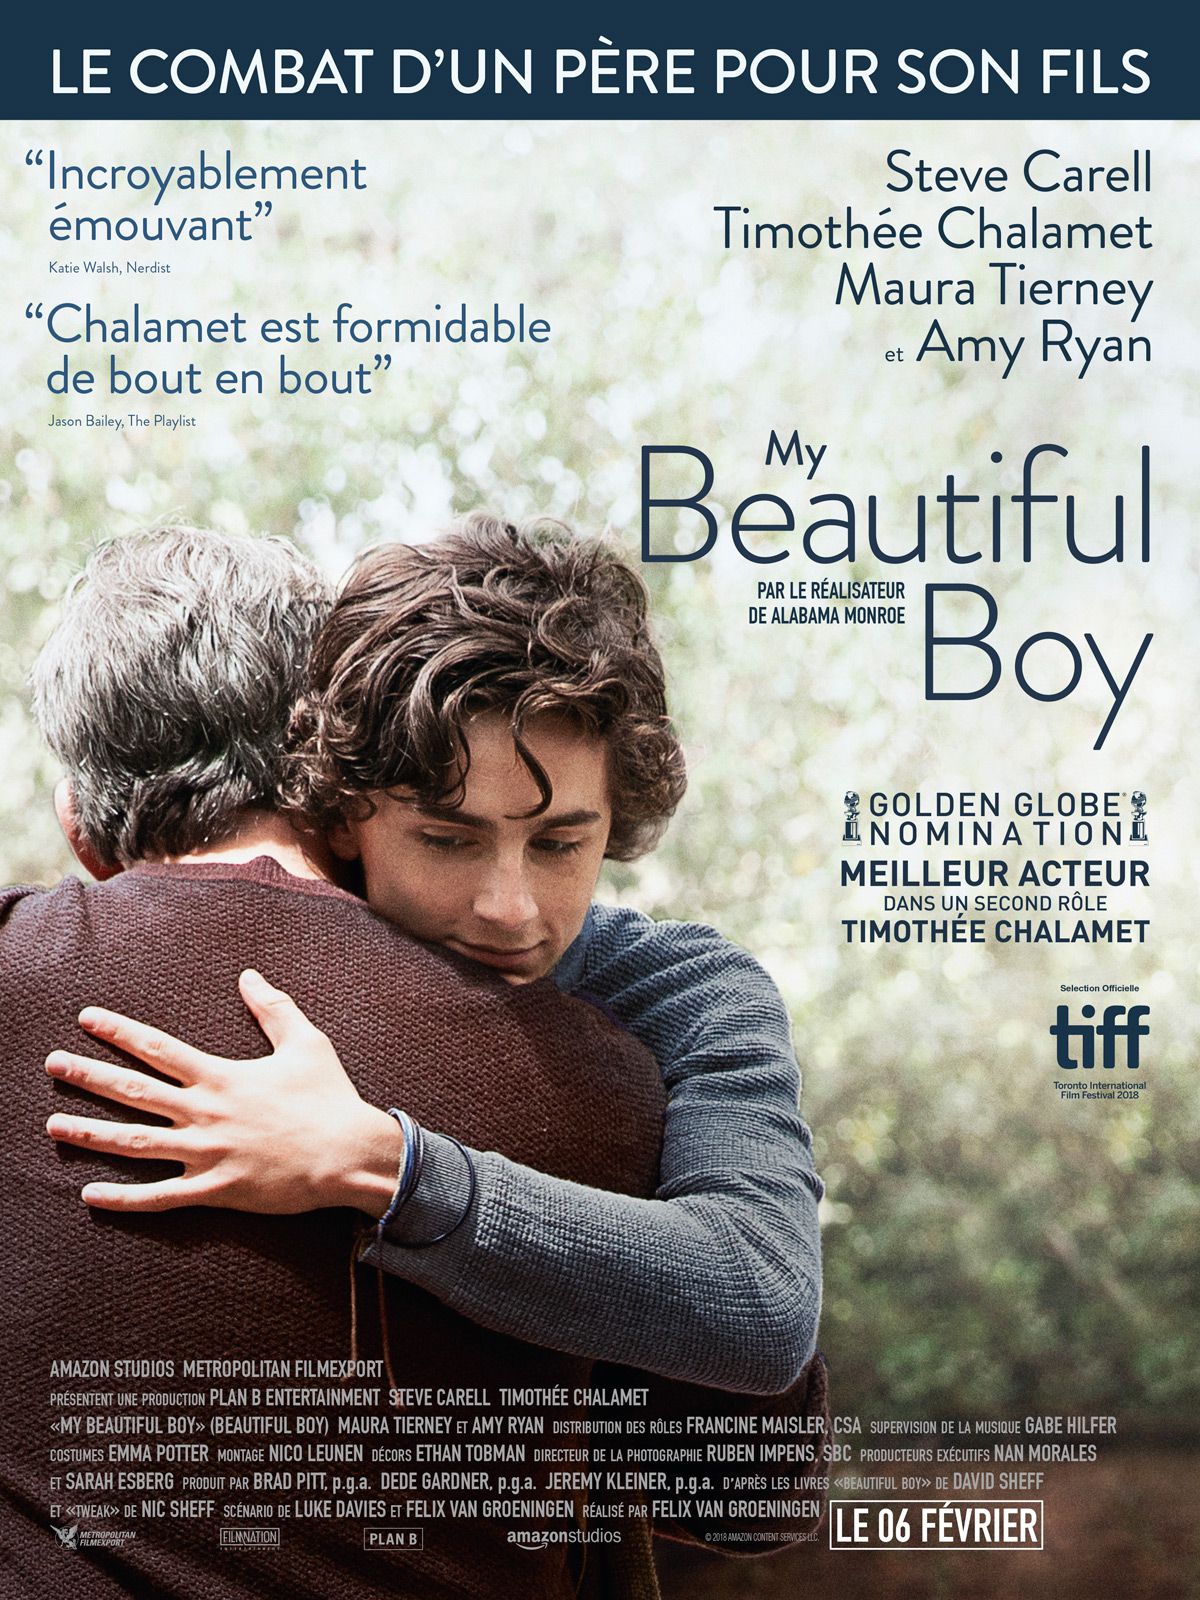 My Beautiful Boy - Film (2019) streaming VF gratuit complet